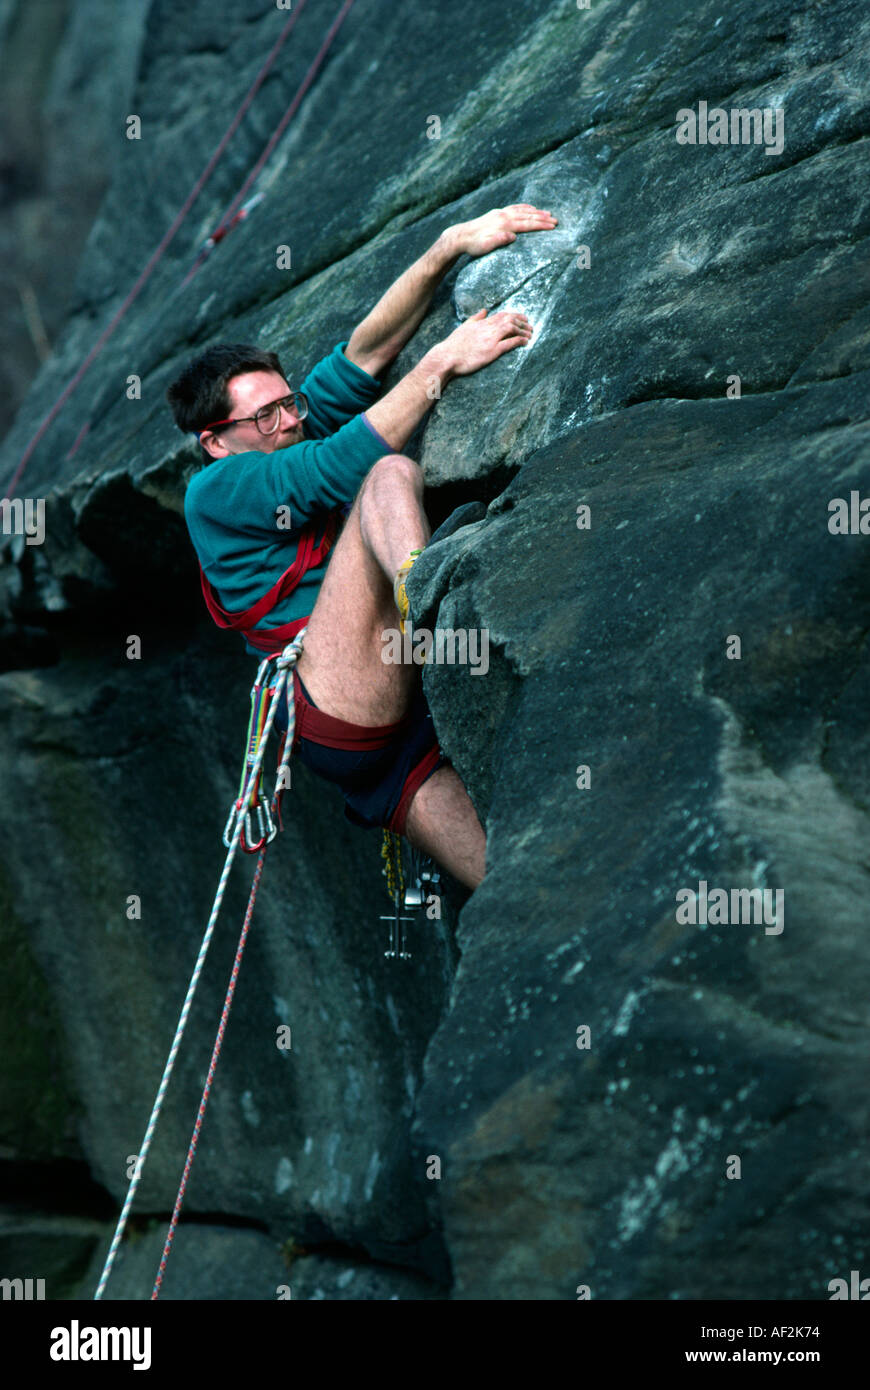 PICTURE CREDIT DOUG BLANE Dave Felce rock climbing in Derbyshire Peak District National Park Great Britain Stock Photo